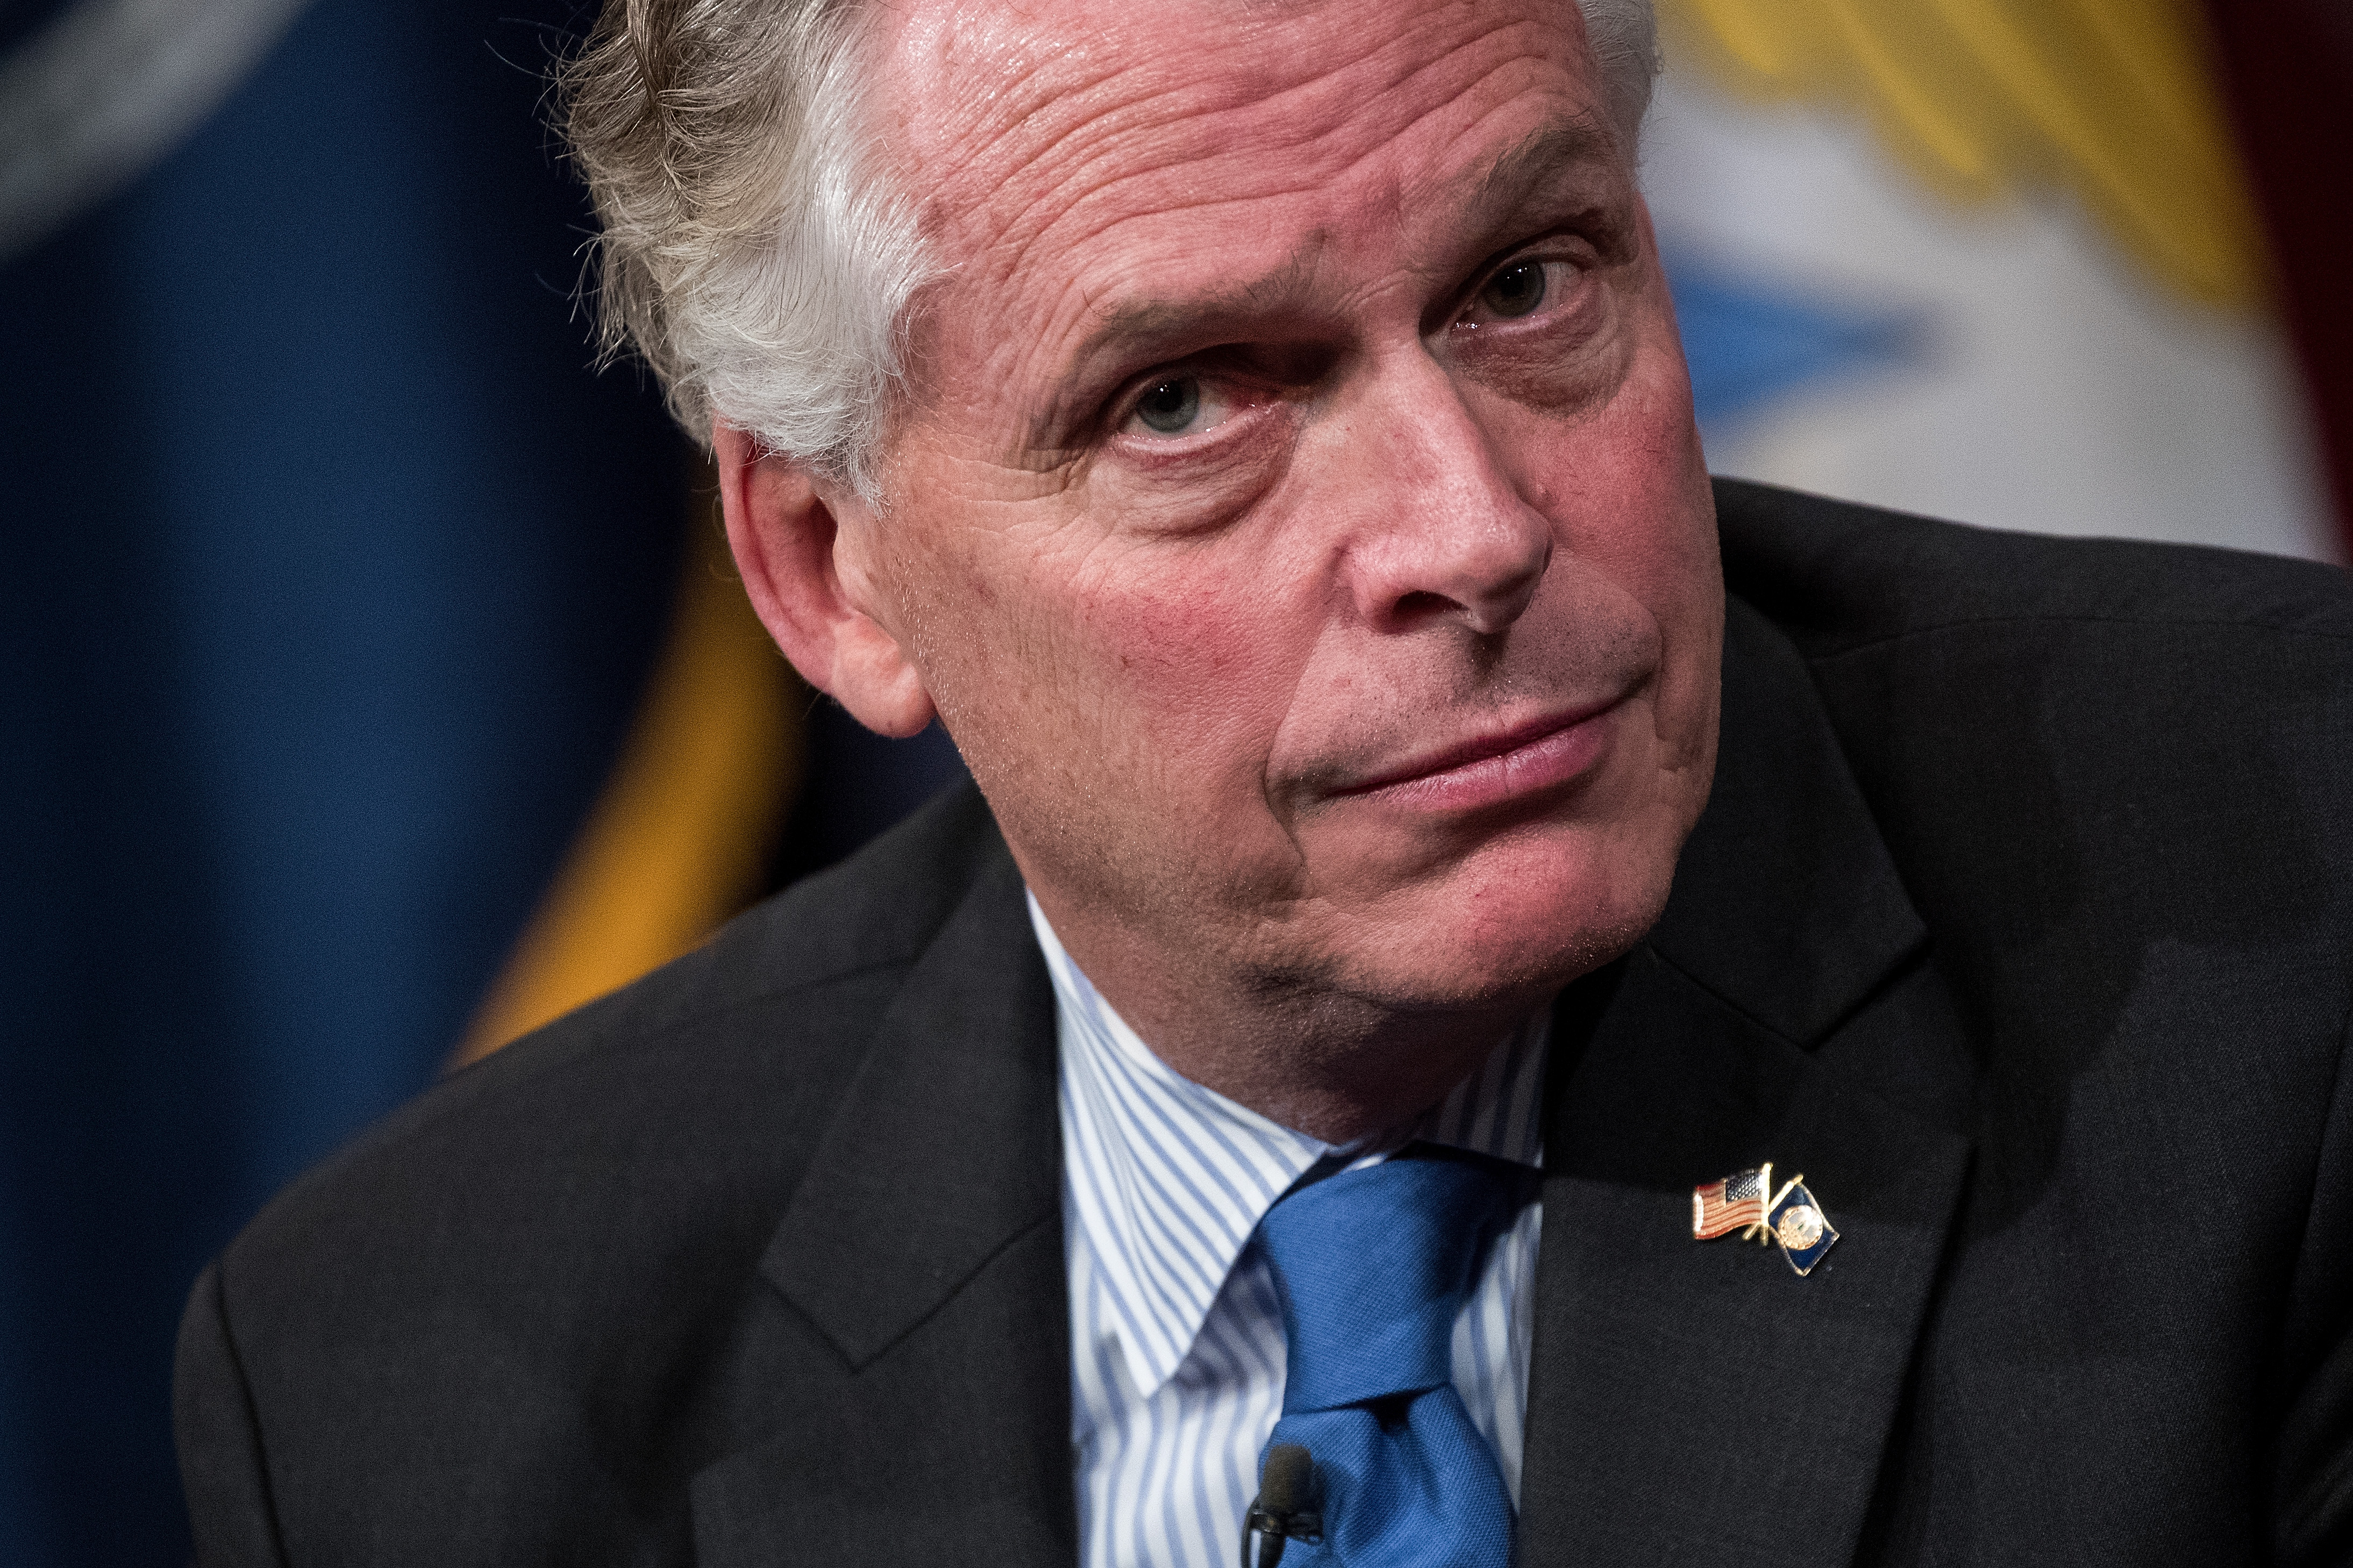 WASHINGTON, DC - JANUARY 25:  Virginia Governor Terry McAuliffe listens to a question during a 'State of the States' event at the Newseum, January 25, 2017 in Washington, DC. The National Governors Association will hold their annual winter meeting in Washington next month. (Photo by Drew Angerer/Getty Images) (Drew Angerer—Getty Images)